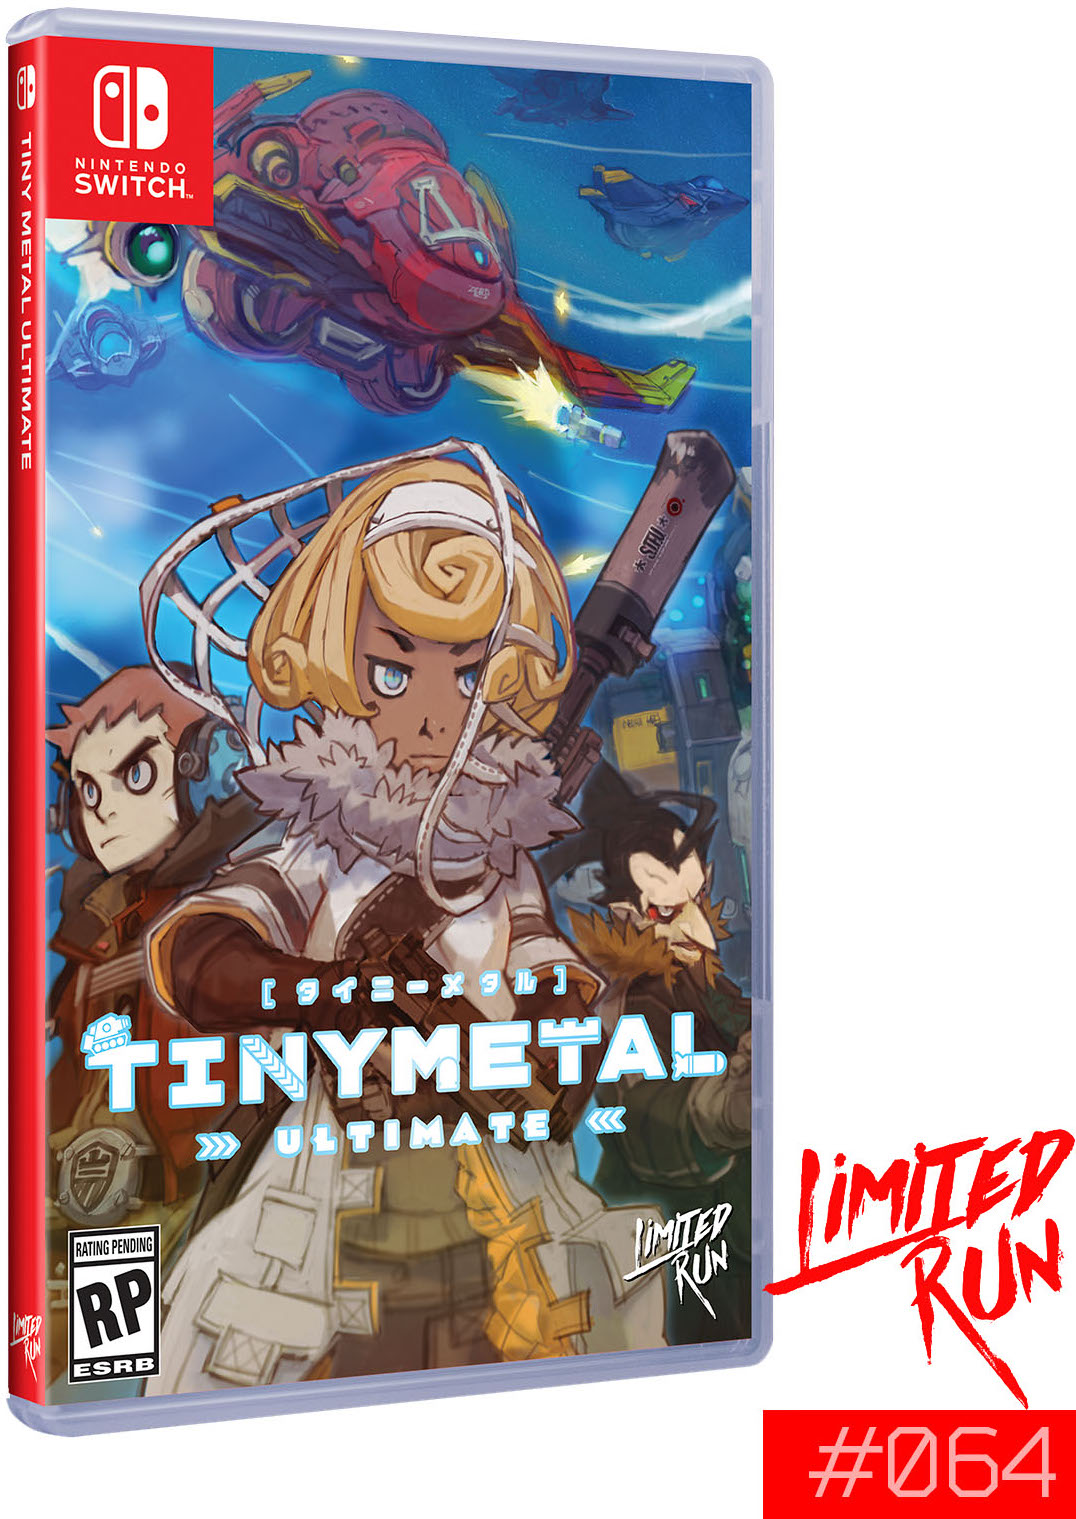 Tiny Metal Ultimate (Limited Run) (Switch), Area 35